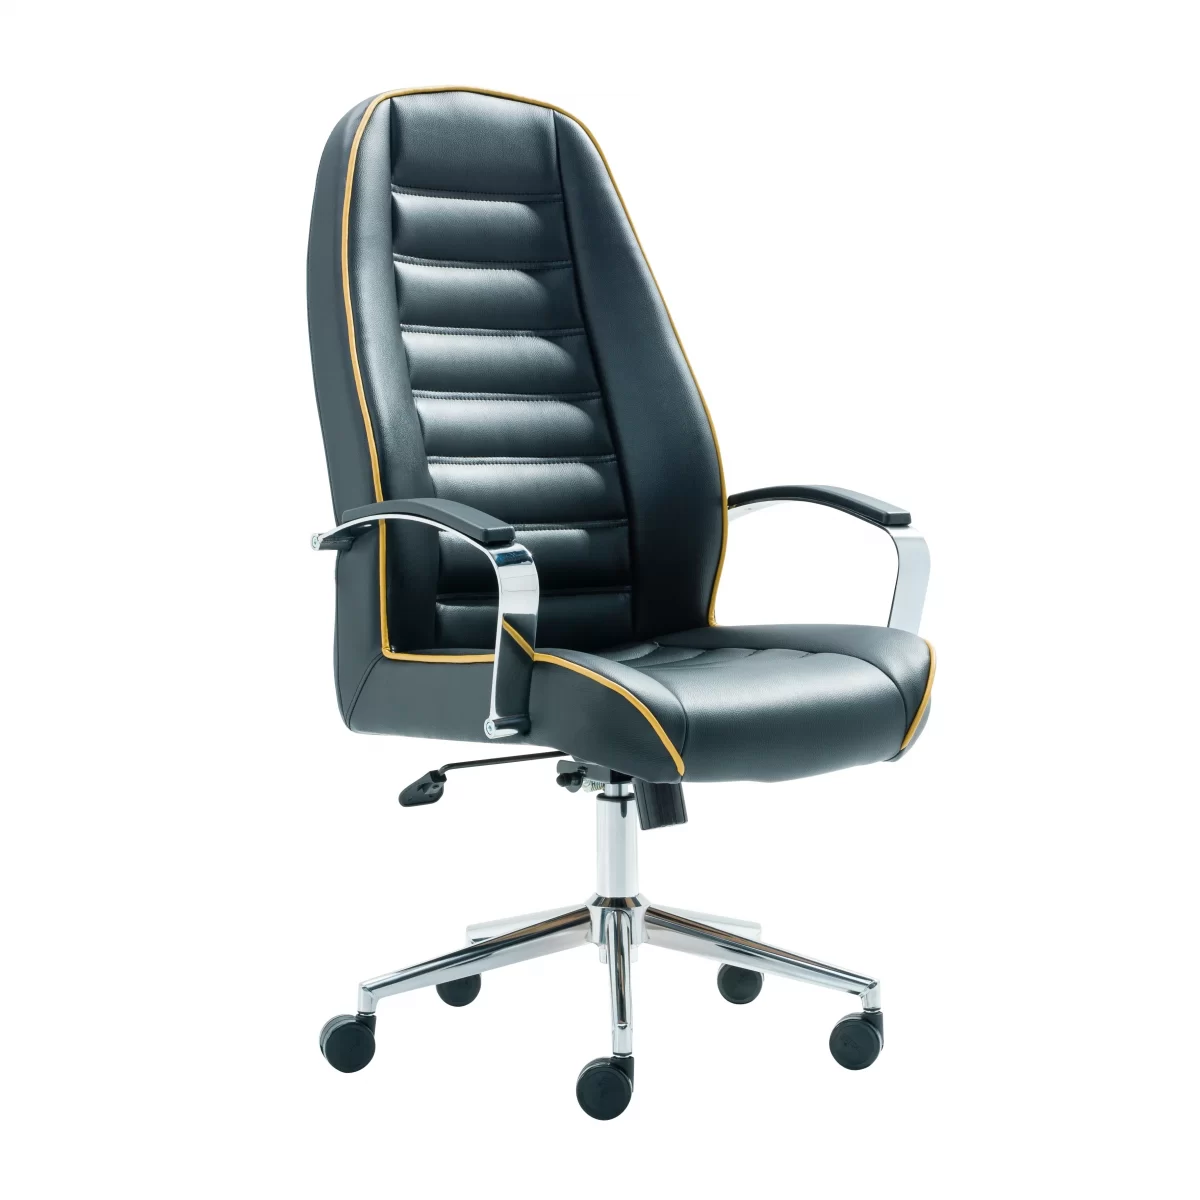 Karina Executive Office Chair Modern Office Chairs Turkey scaled